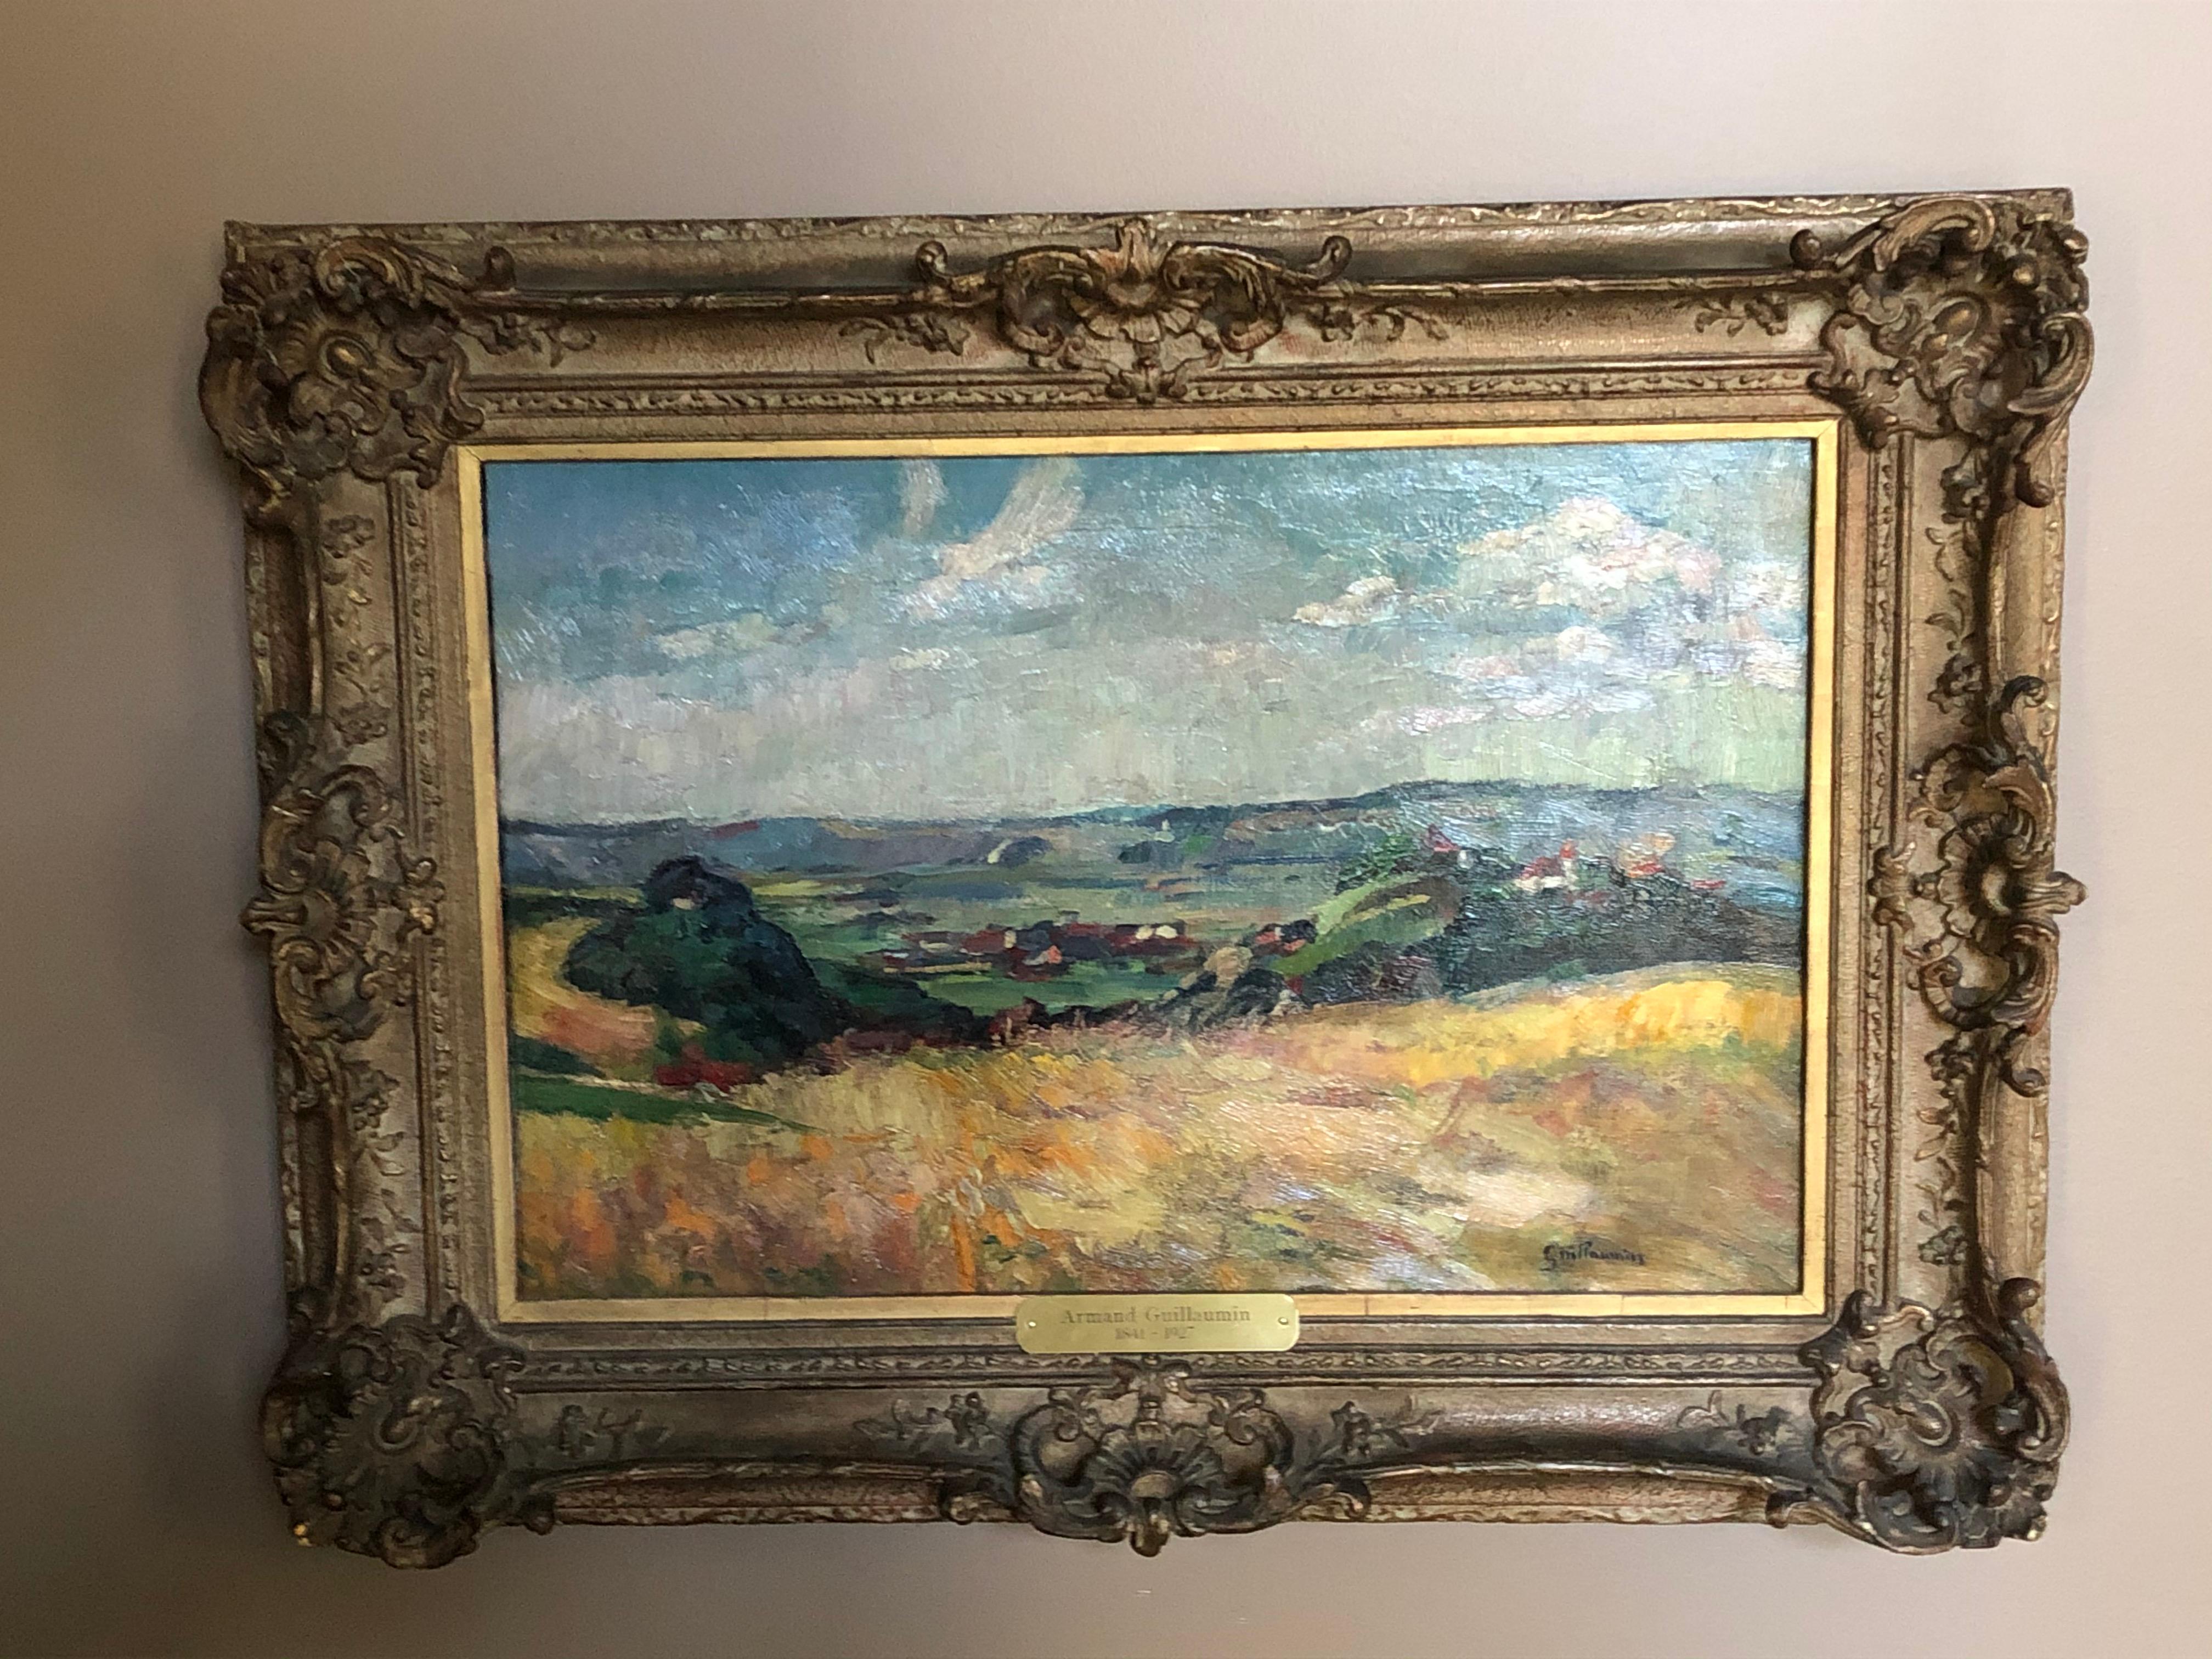 A gorgeous work by a major, original French Impressionist painter and friend of Van Gogh, professionally cleaned and beautifully framed. Guillaumin's paintings are in important museums all over the world. From Neal Auction Company description: 